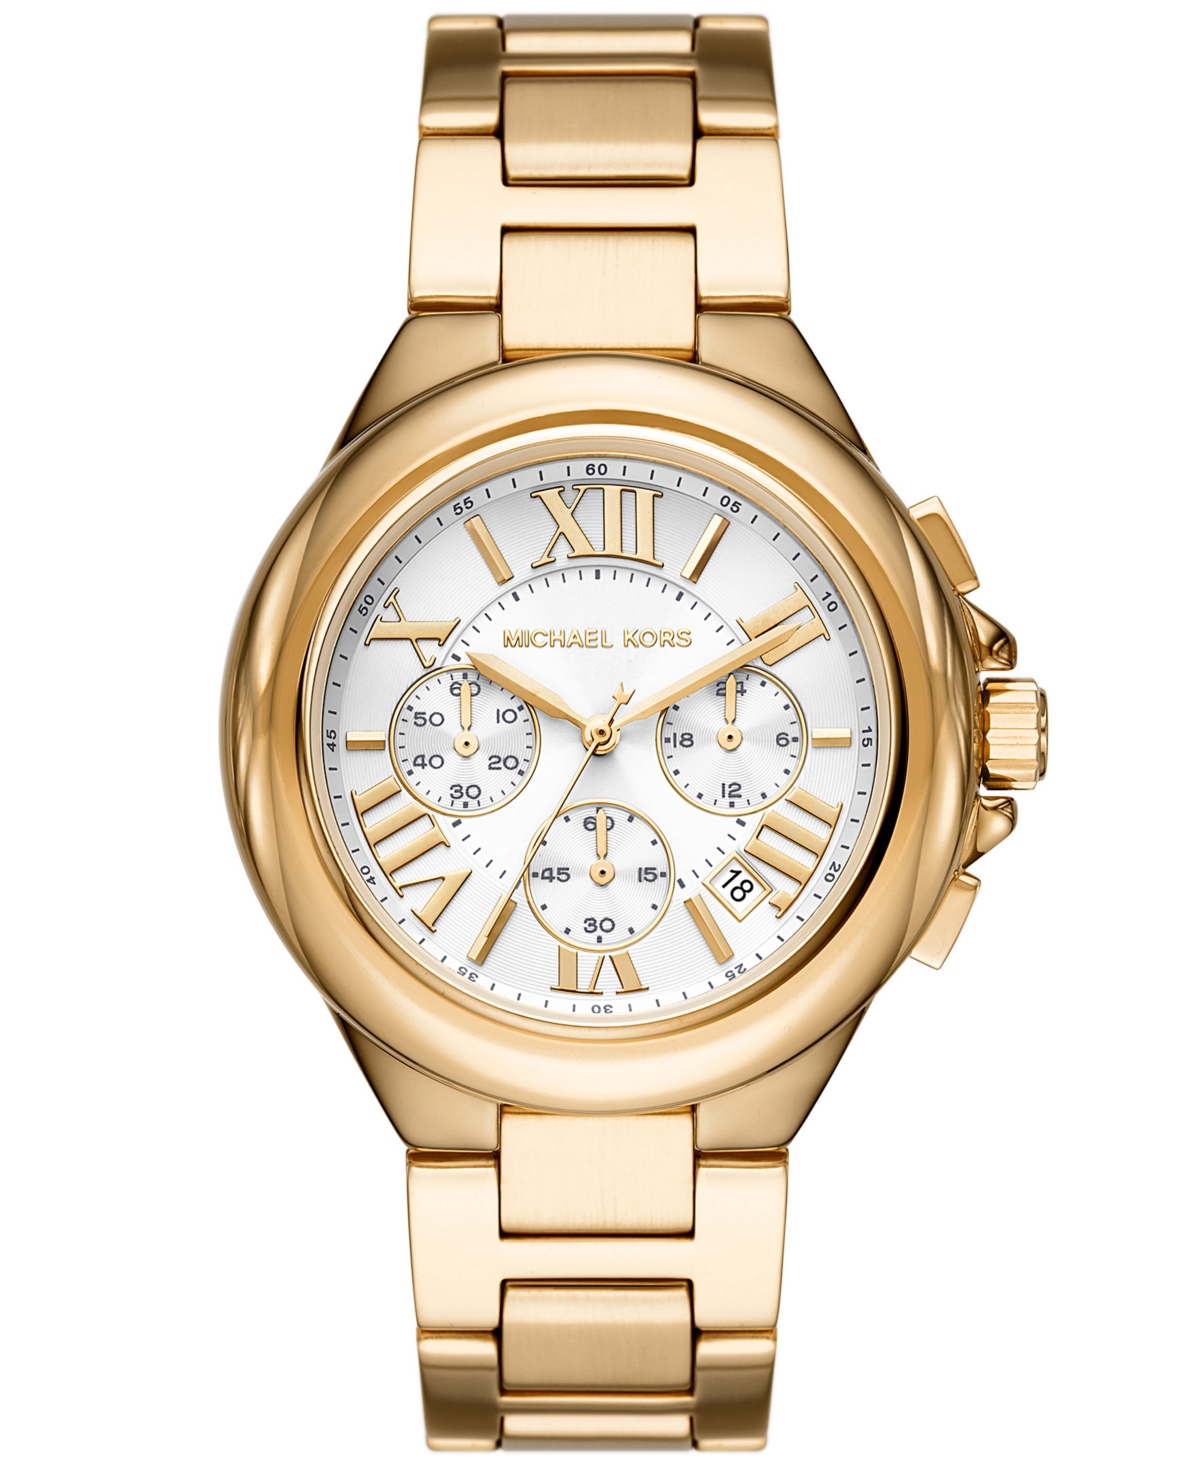 Michael Kors Women's Camille Chronograph Gold-tone Stainless Steel Bracelet Watch 43mm